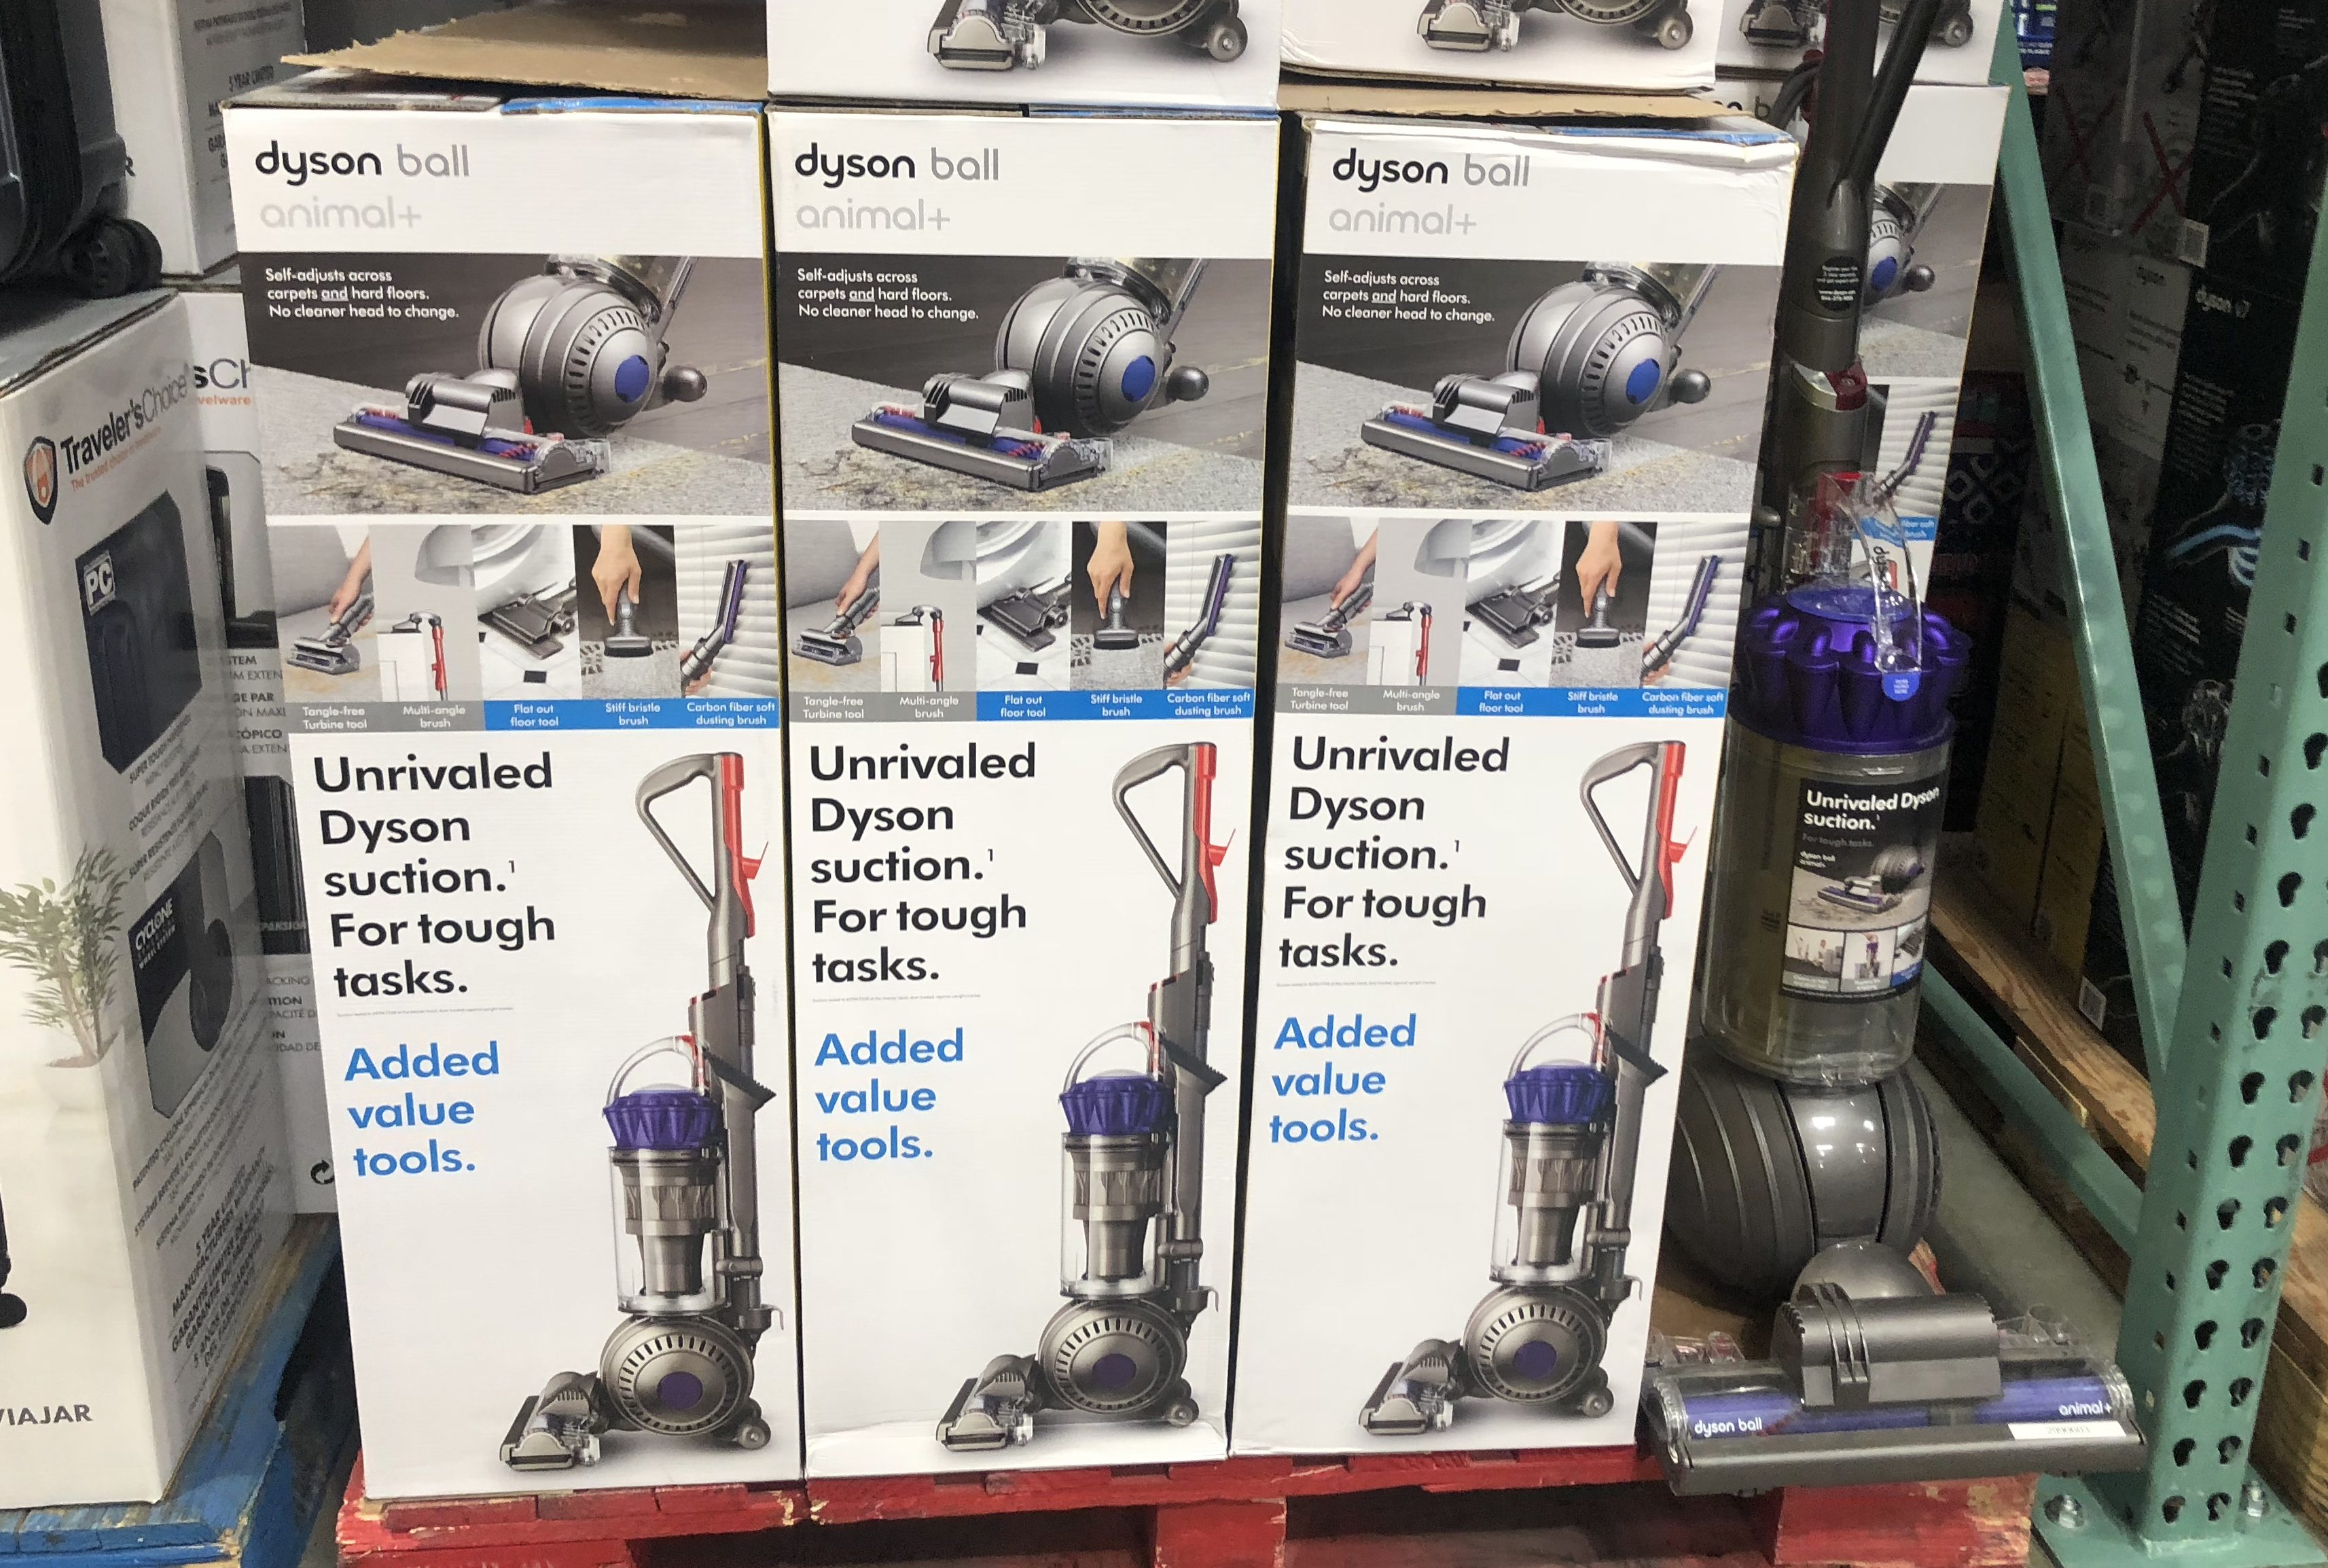 https://hip2save.com/wp-content/uploads/2018/10/dyson-ball-vacuum-at-costco-e1539033113629.jpg?resize=3427%2C2308&strip=all